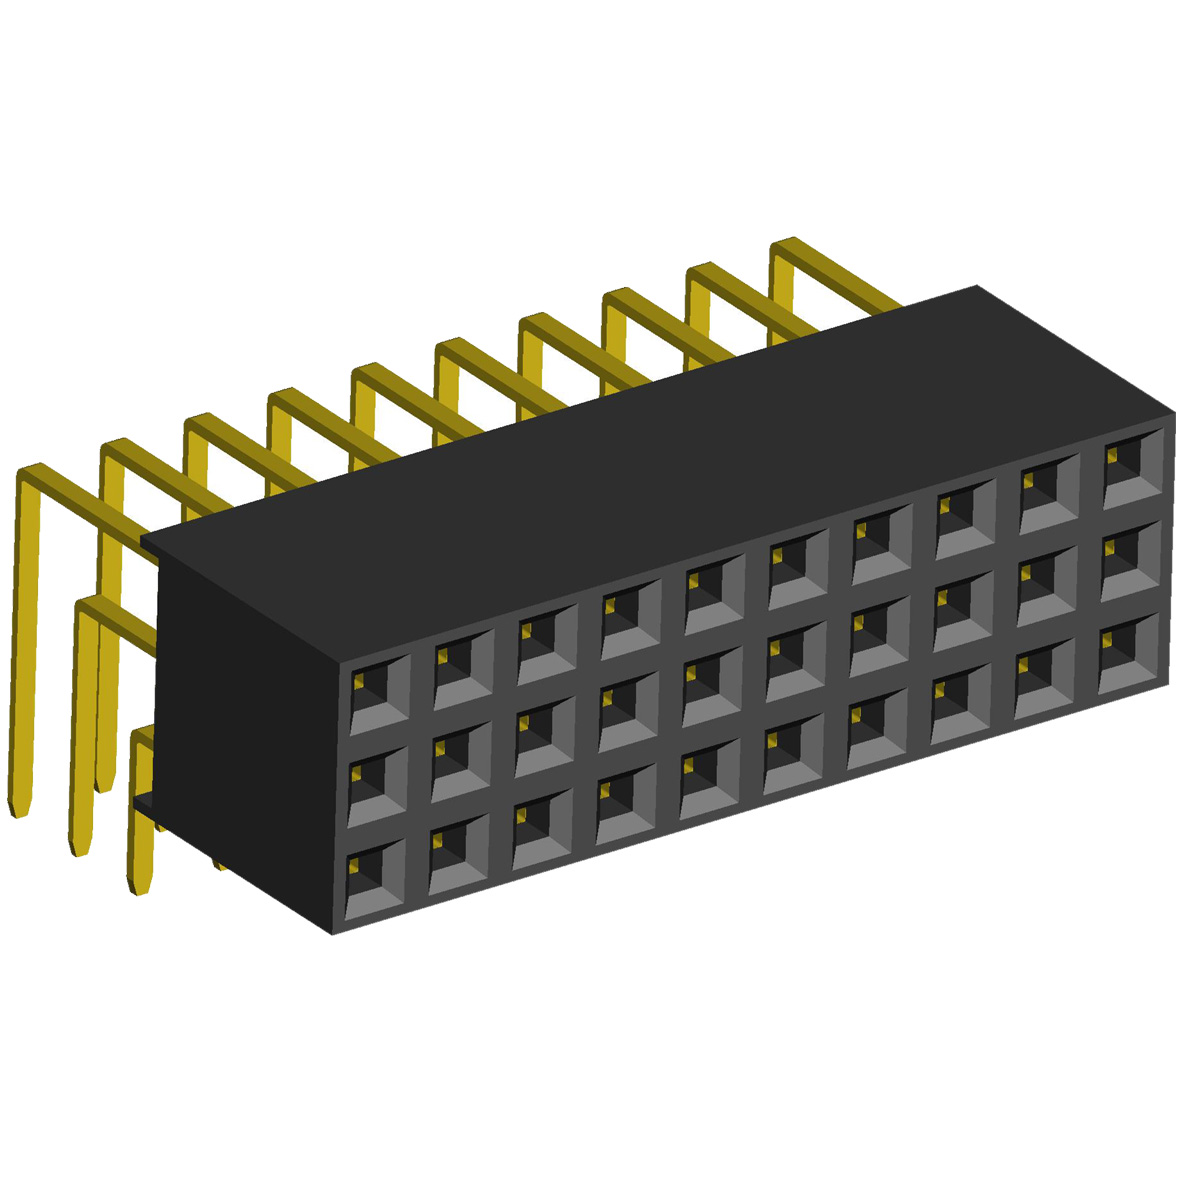 2234R-XXXG-85 (PBT-XXXR) series, three-row angular sockets on the board for installation in holes, pitch 2,54x2,54 mm, Board-to-Board connectors, pin headers and sockets > pitch 2,54x2,54 mm